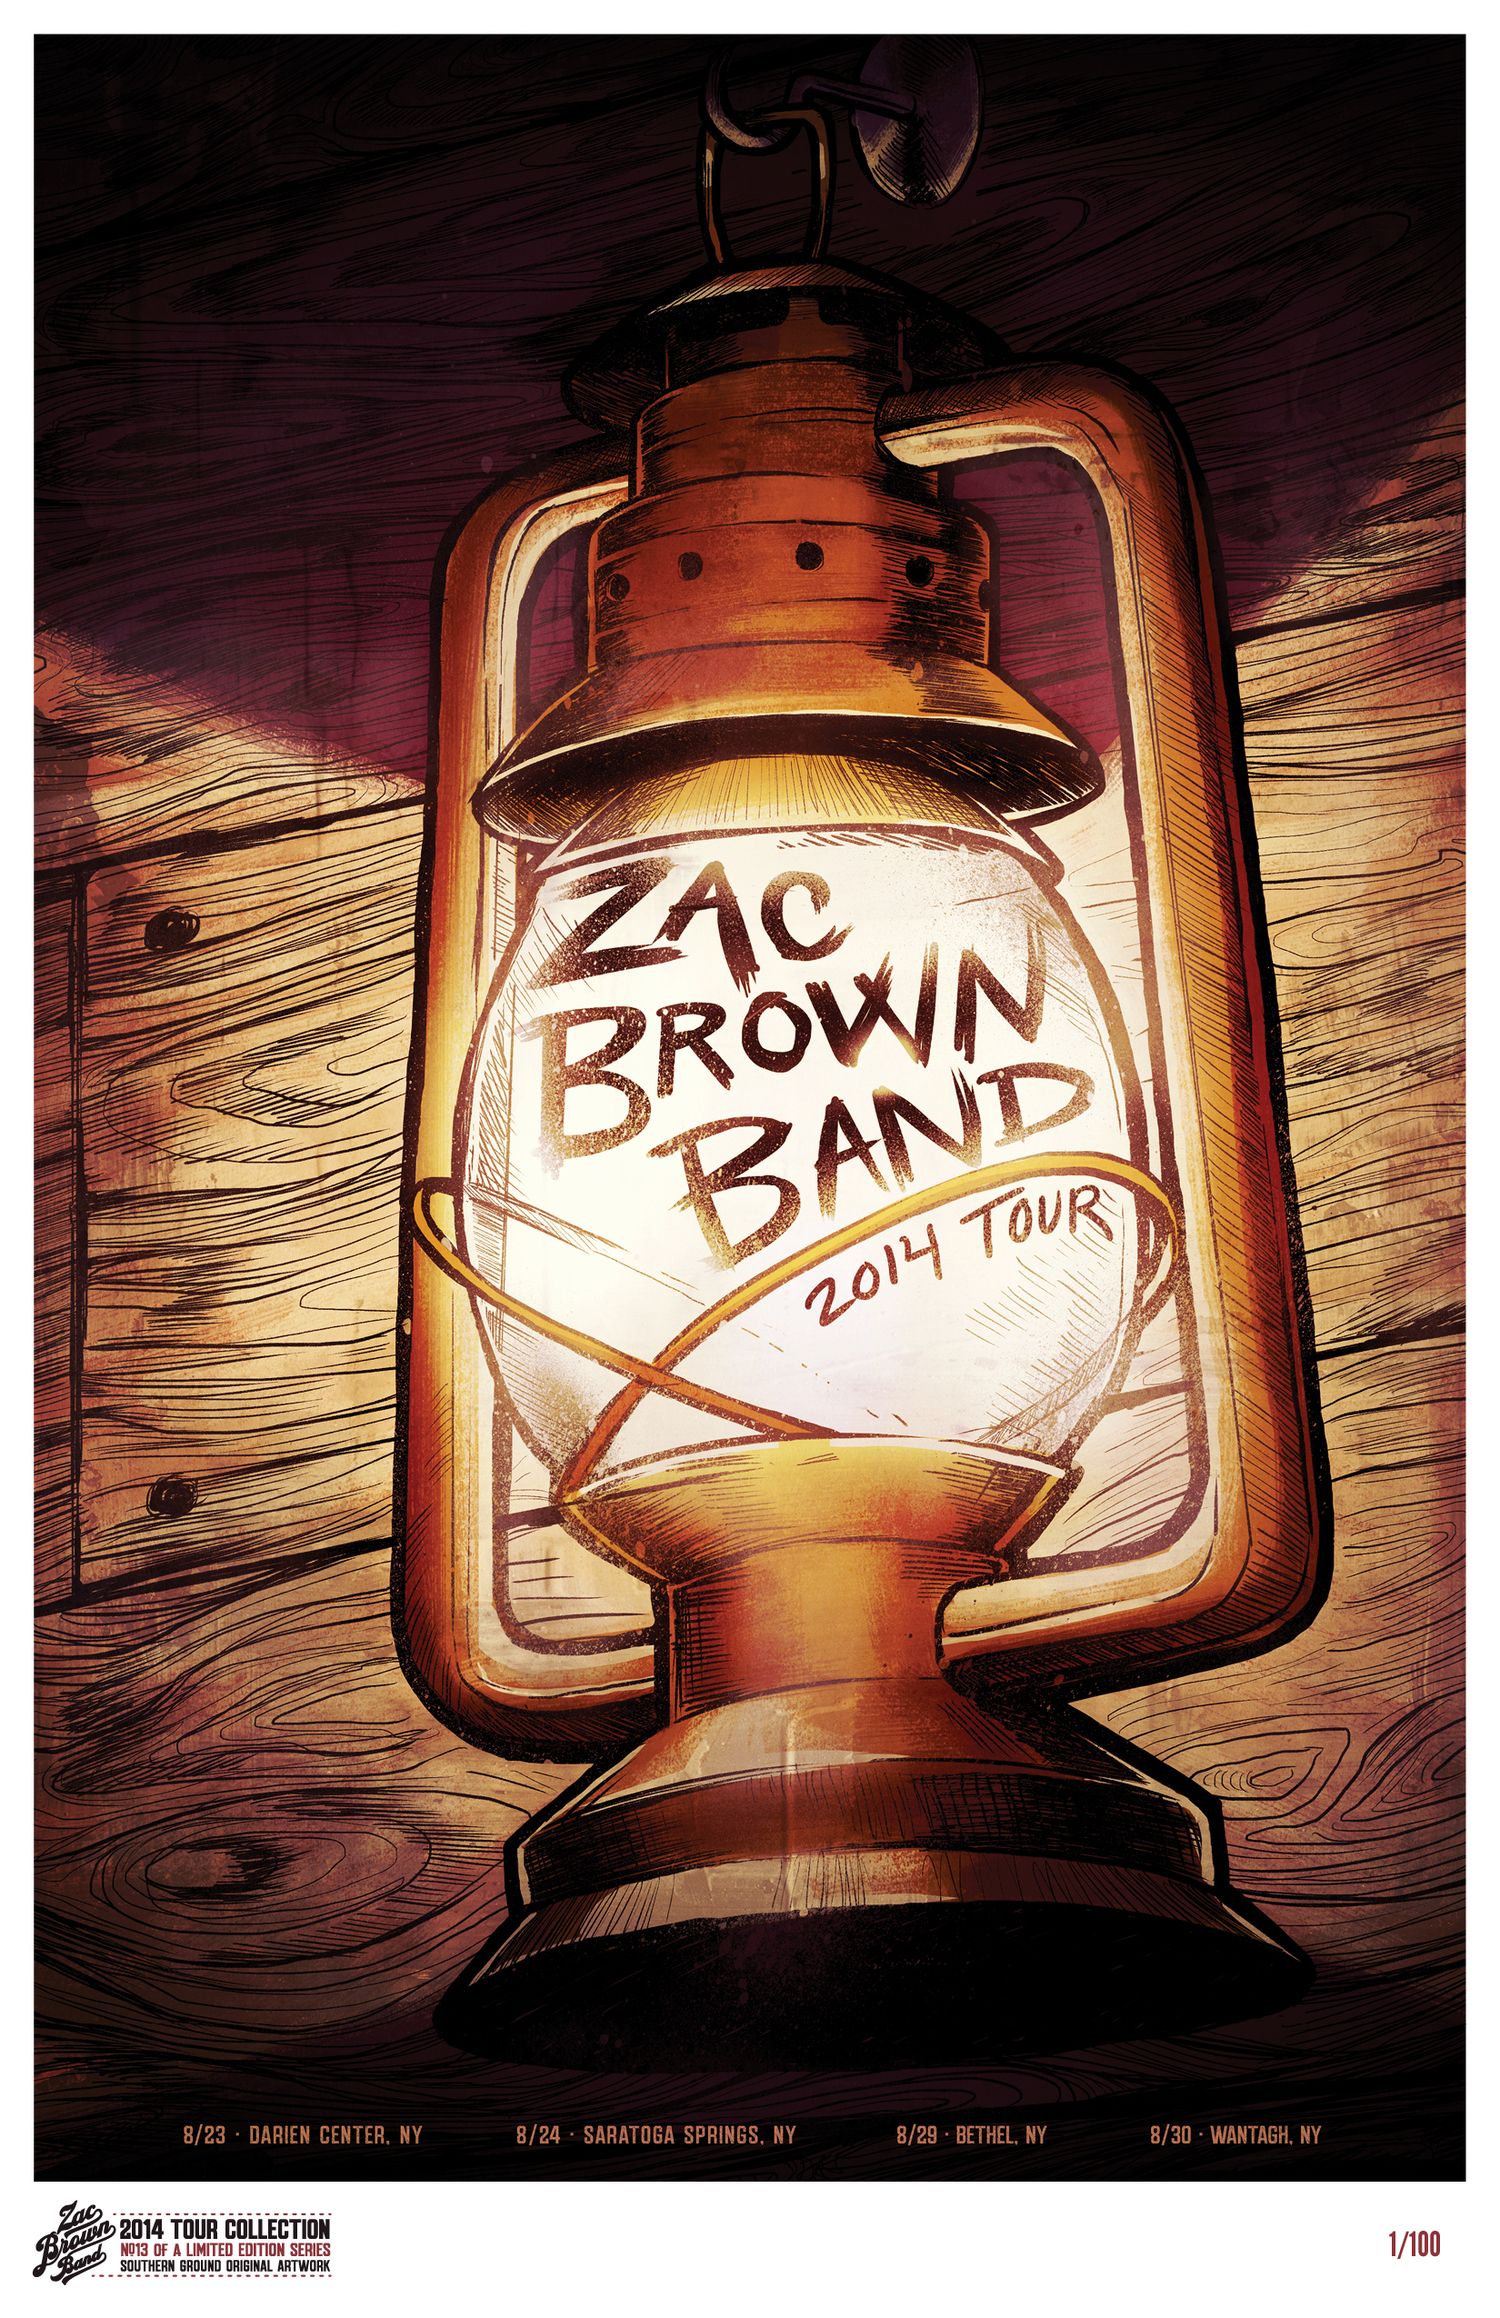 ILLUSTRATION. Zac brown band, Band posters, Concert posters